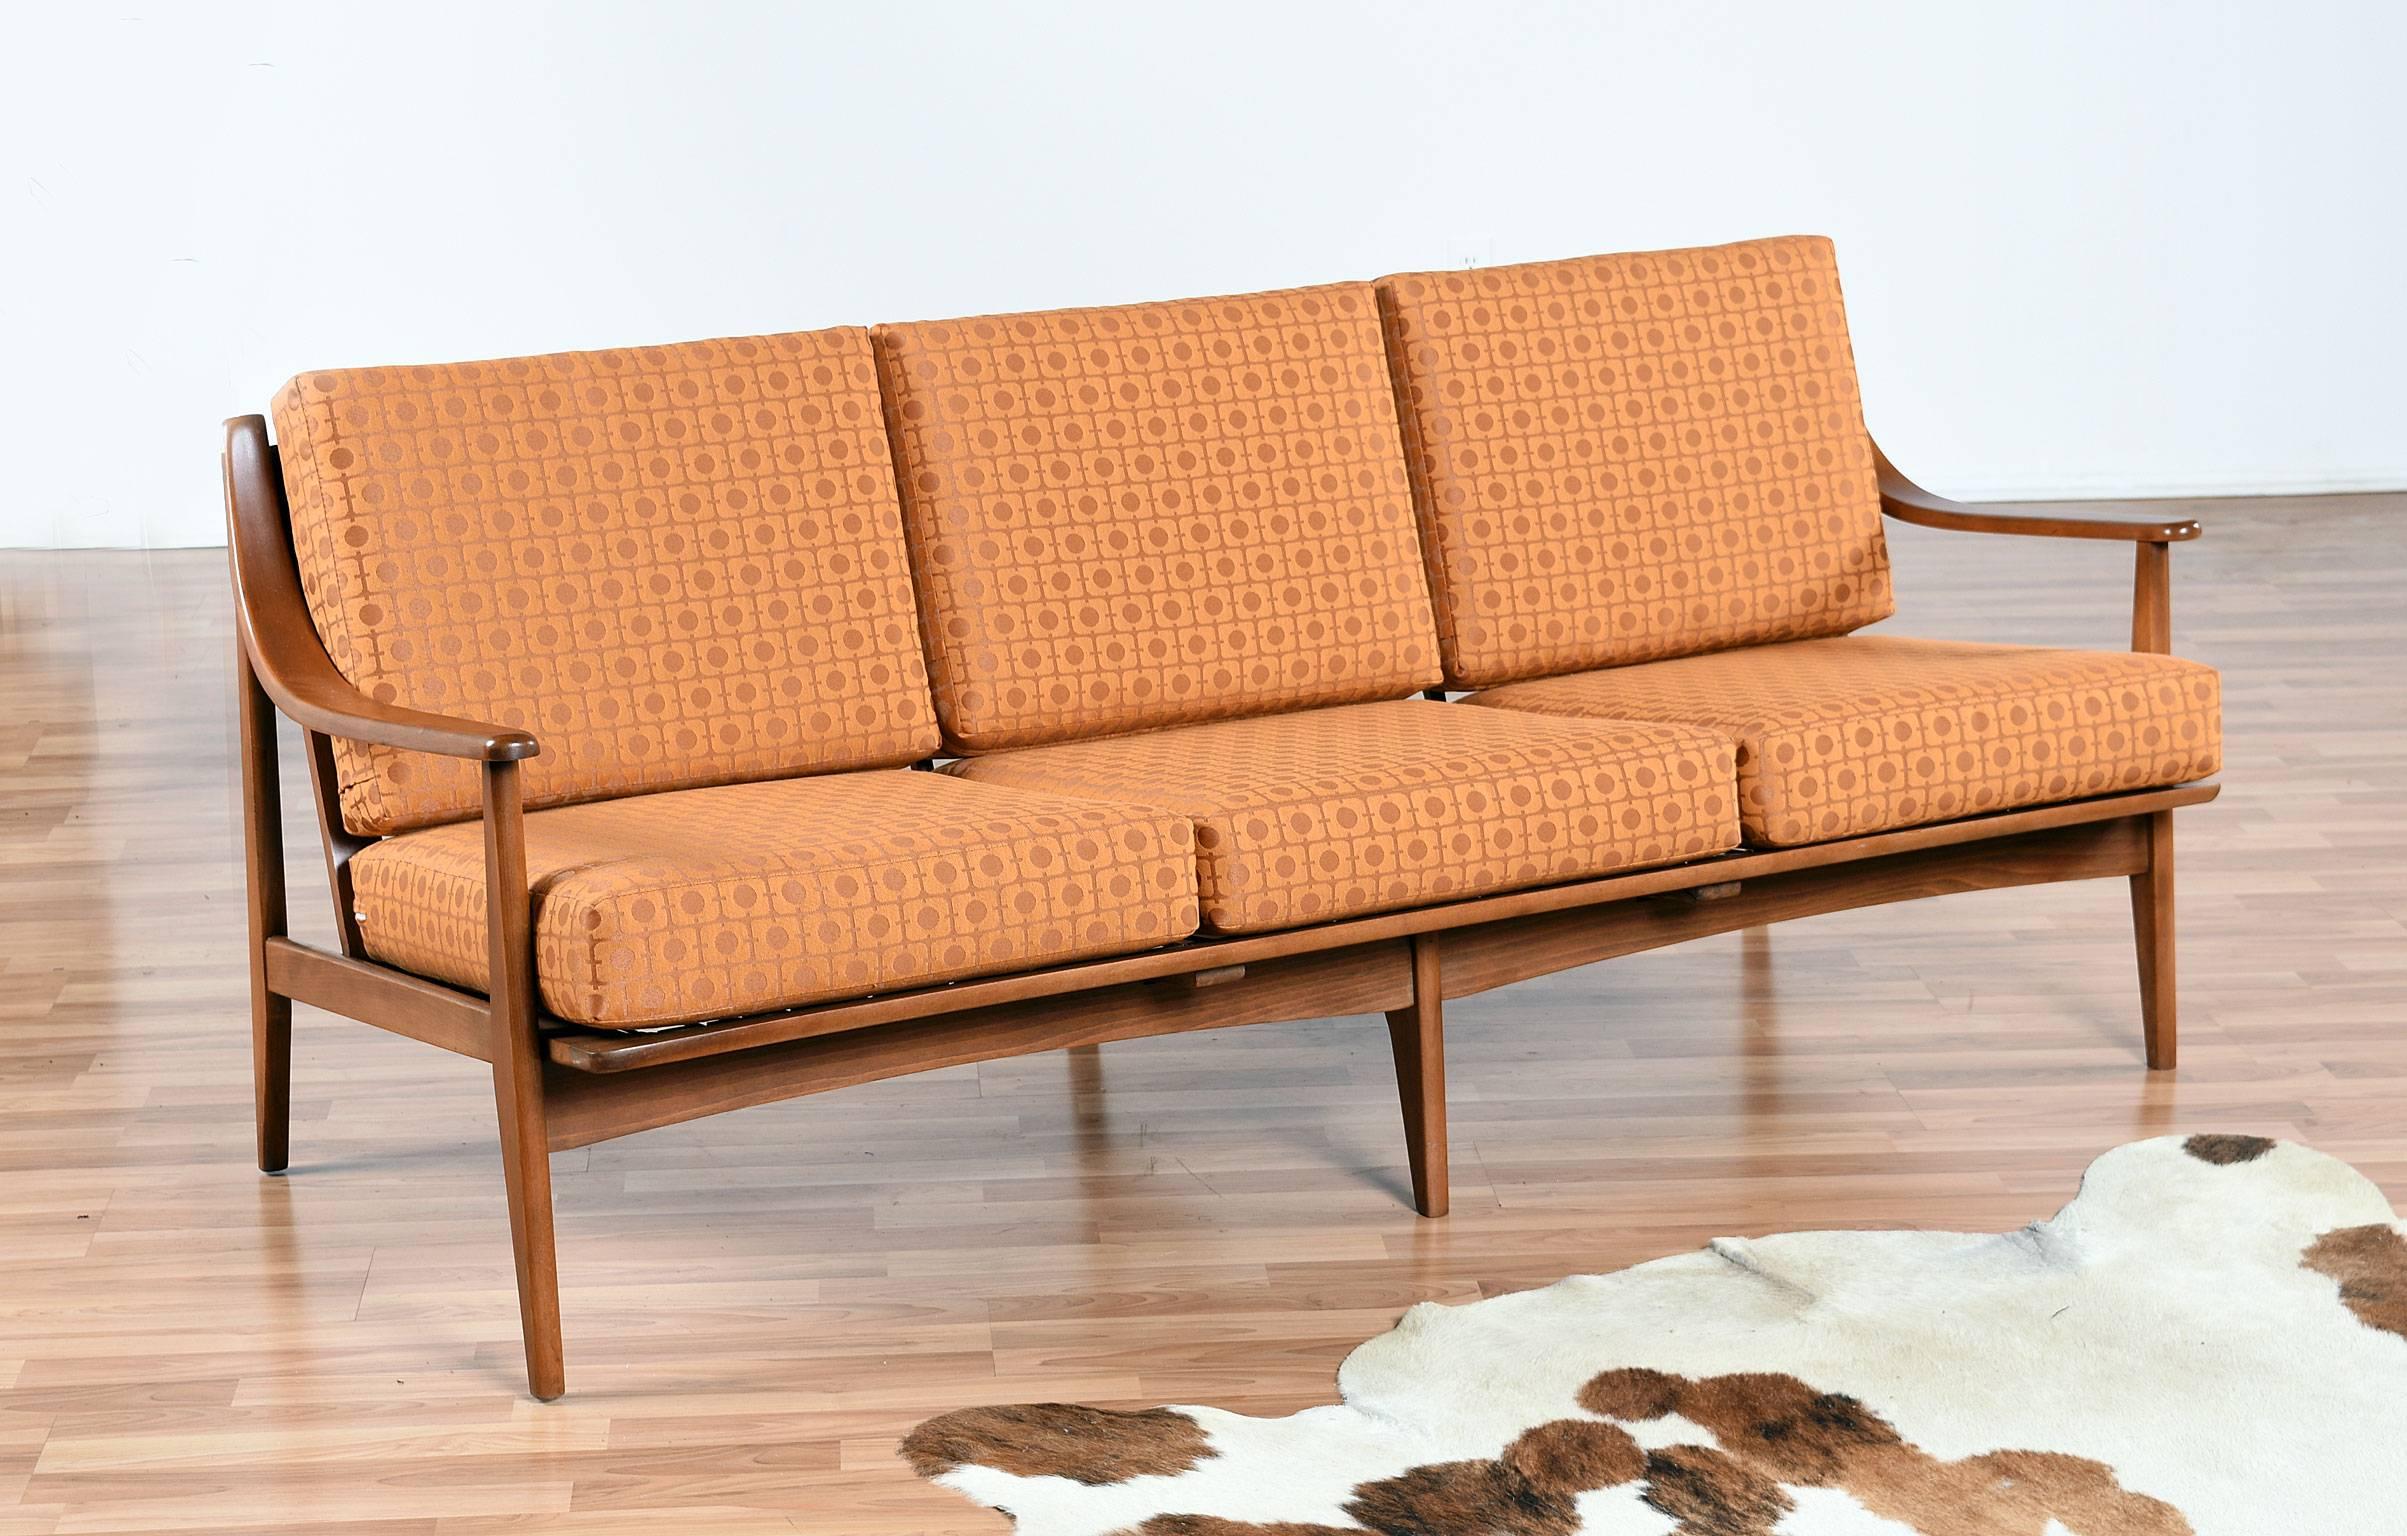 Lots of period charm in this restored Mid-Century Modern sofa. The gracefully sloped arms mimic Scandinavian designs adding an air of elegance to this American made couch. The sofa has been updated with new webbing straps, new cushion foam and a